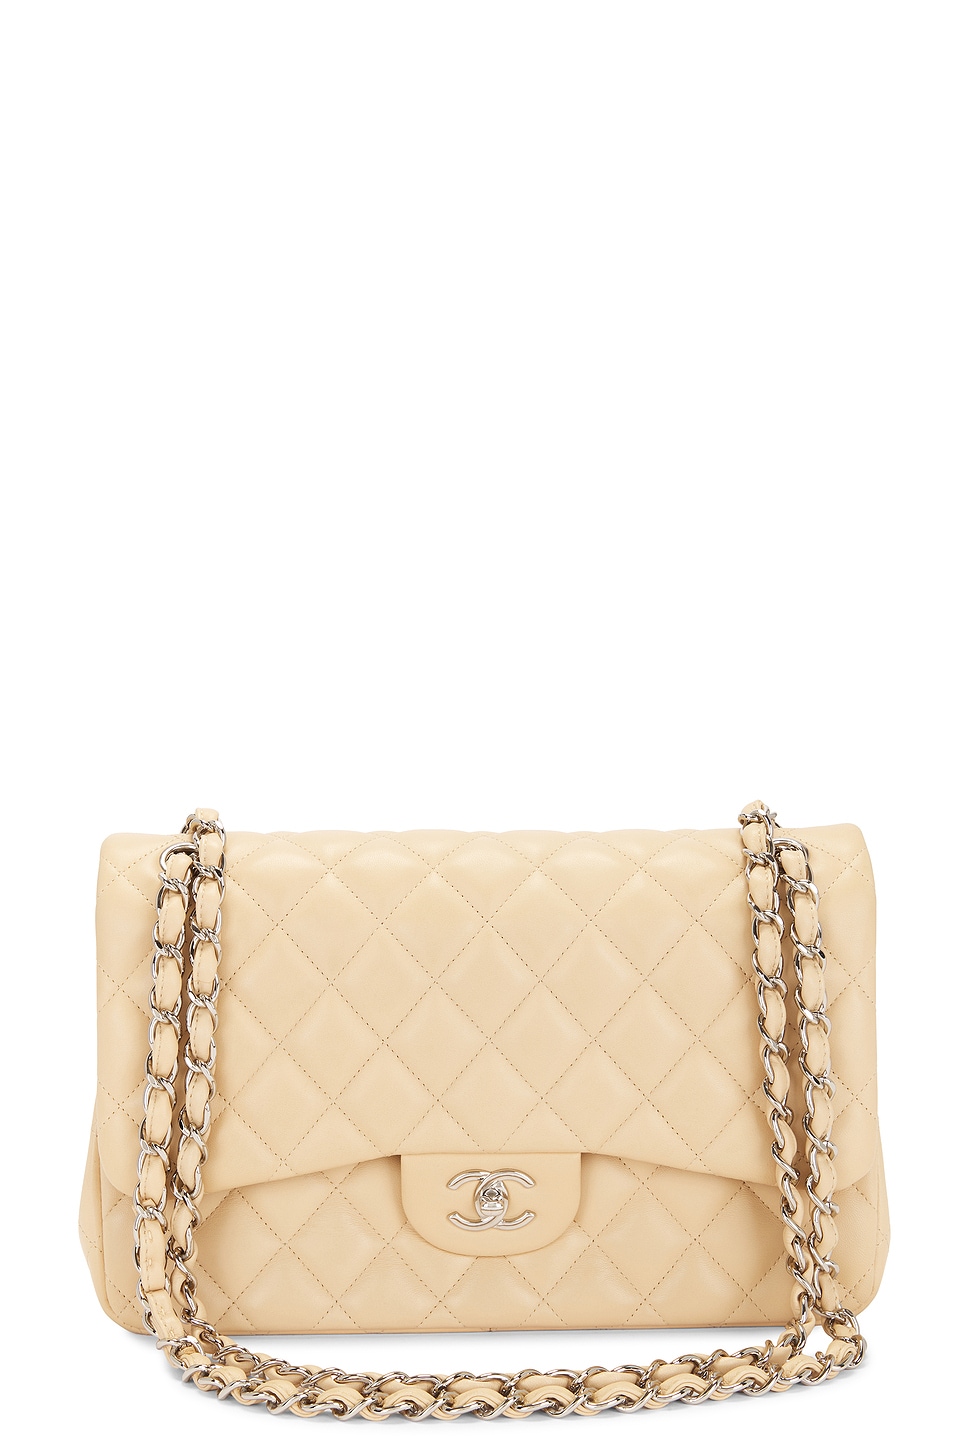 Pre-owned Chanel Quilted Chain Double Flap Shoulder Bag In Tan